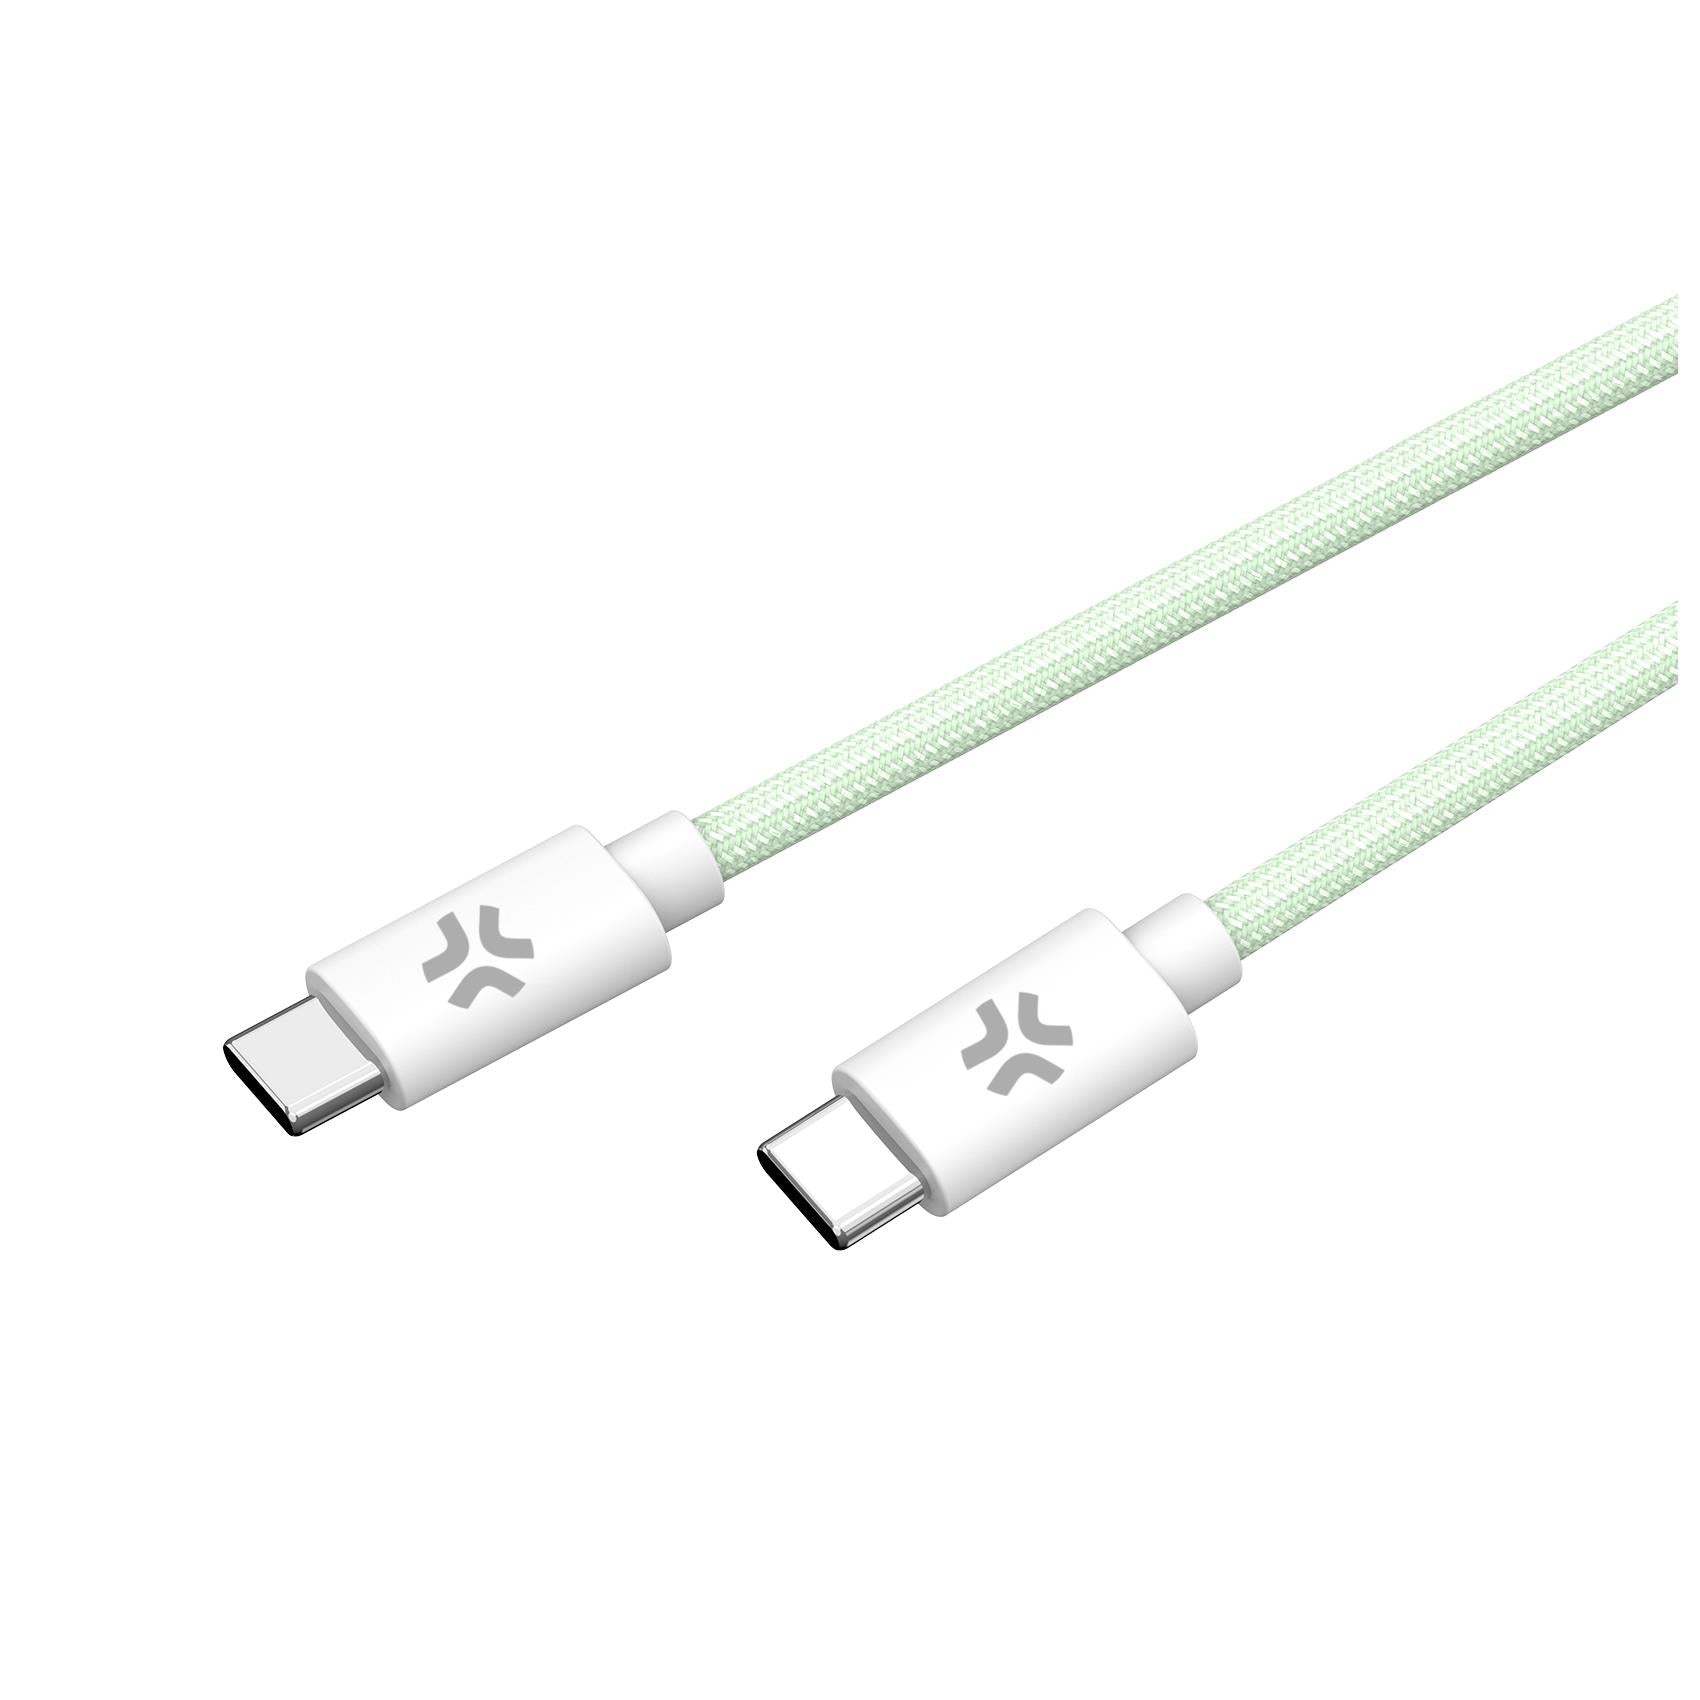 Celly USBCUSBCCOTT - USB-C to USB-C Cotton Braided Cable Green